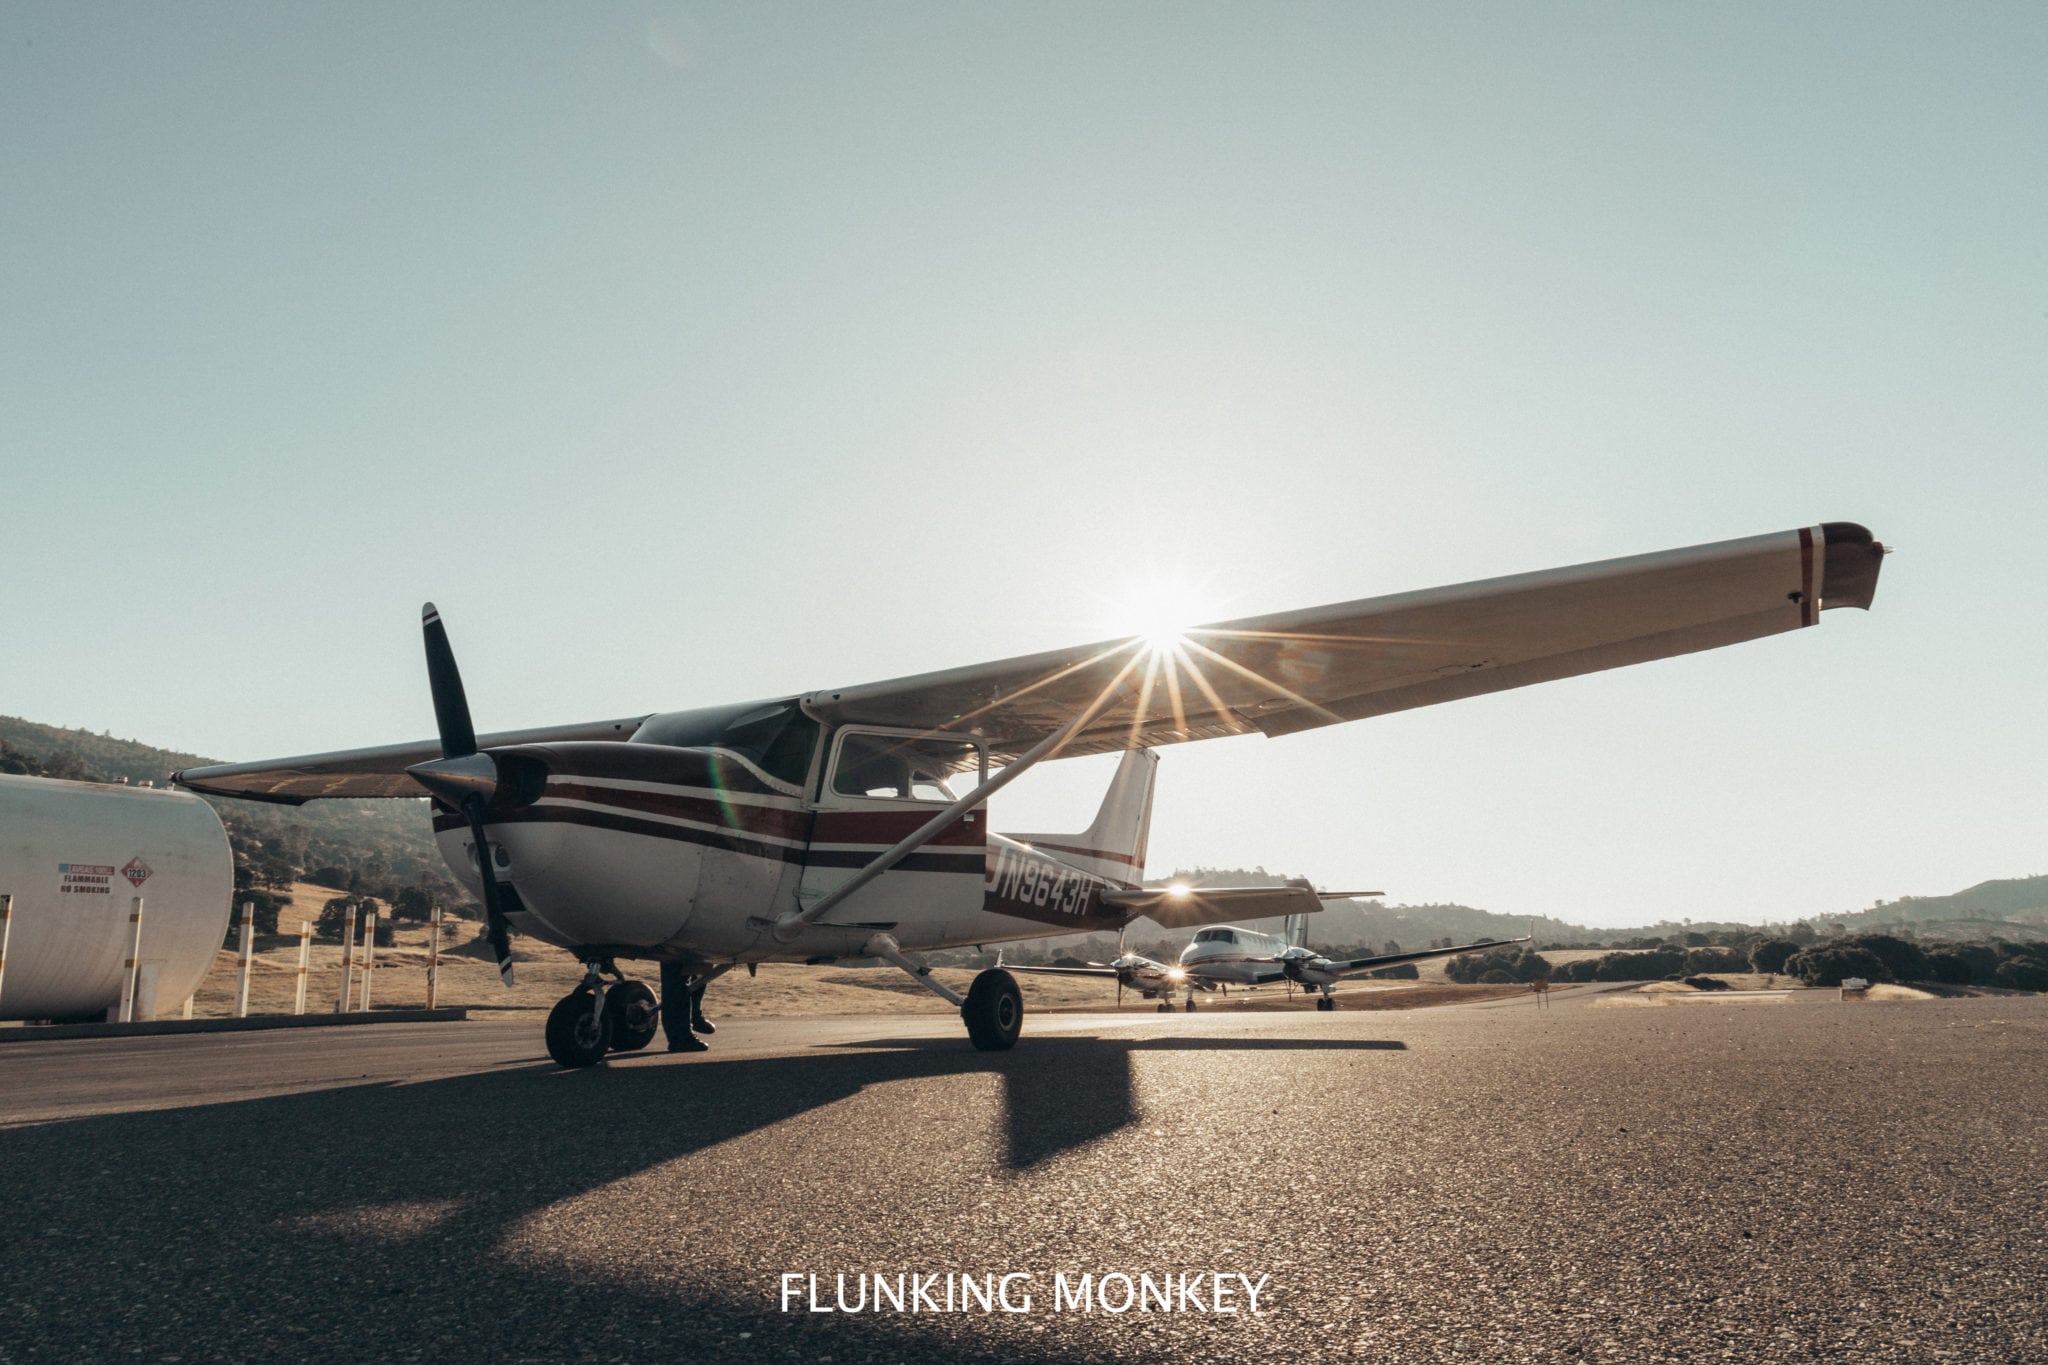 12 Ways To Have The Ultimate Northern California Road Trip - Things To Do: Yosemite Scenic Air Tour